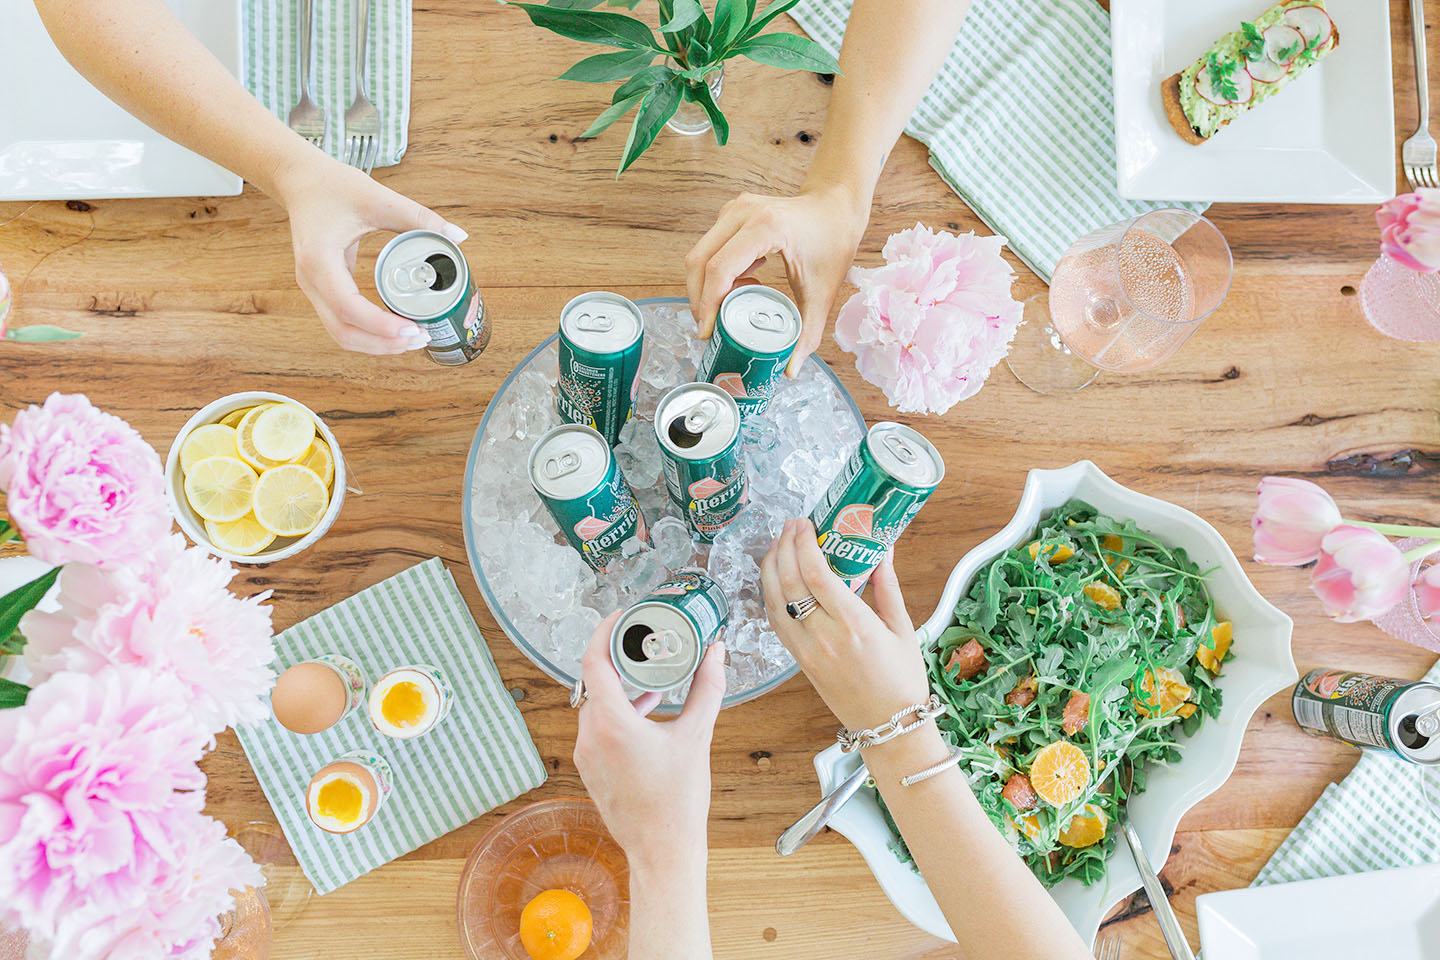 Summer Brunch with Perrier